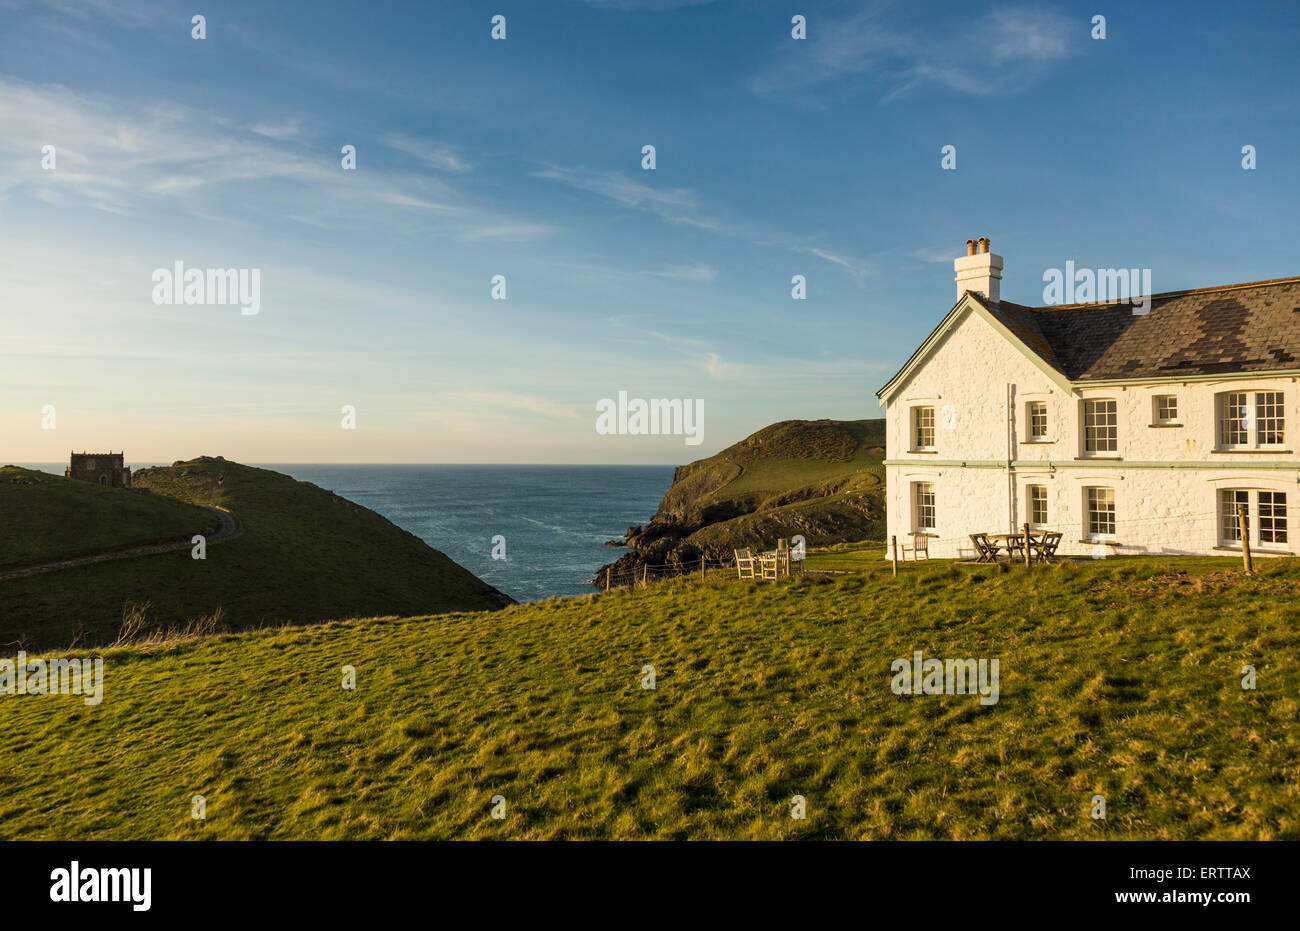 Doyden Castle on headland and house overlook the sea at sunset at Port Quin, Cornwall, England, UK Stock Photo